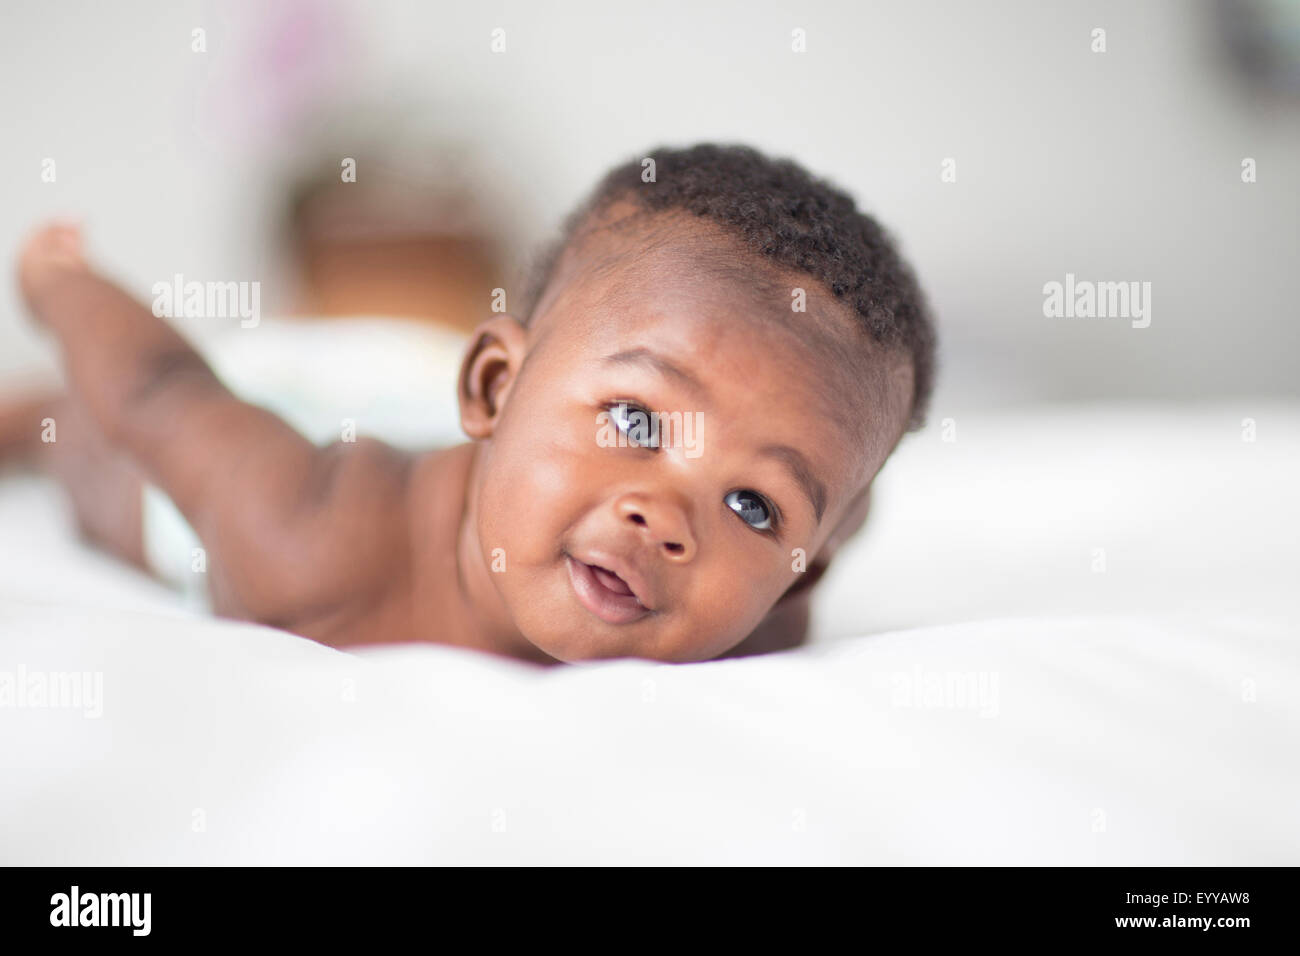 Close up of Black baby laying on bed Stock Photo